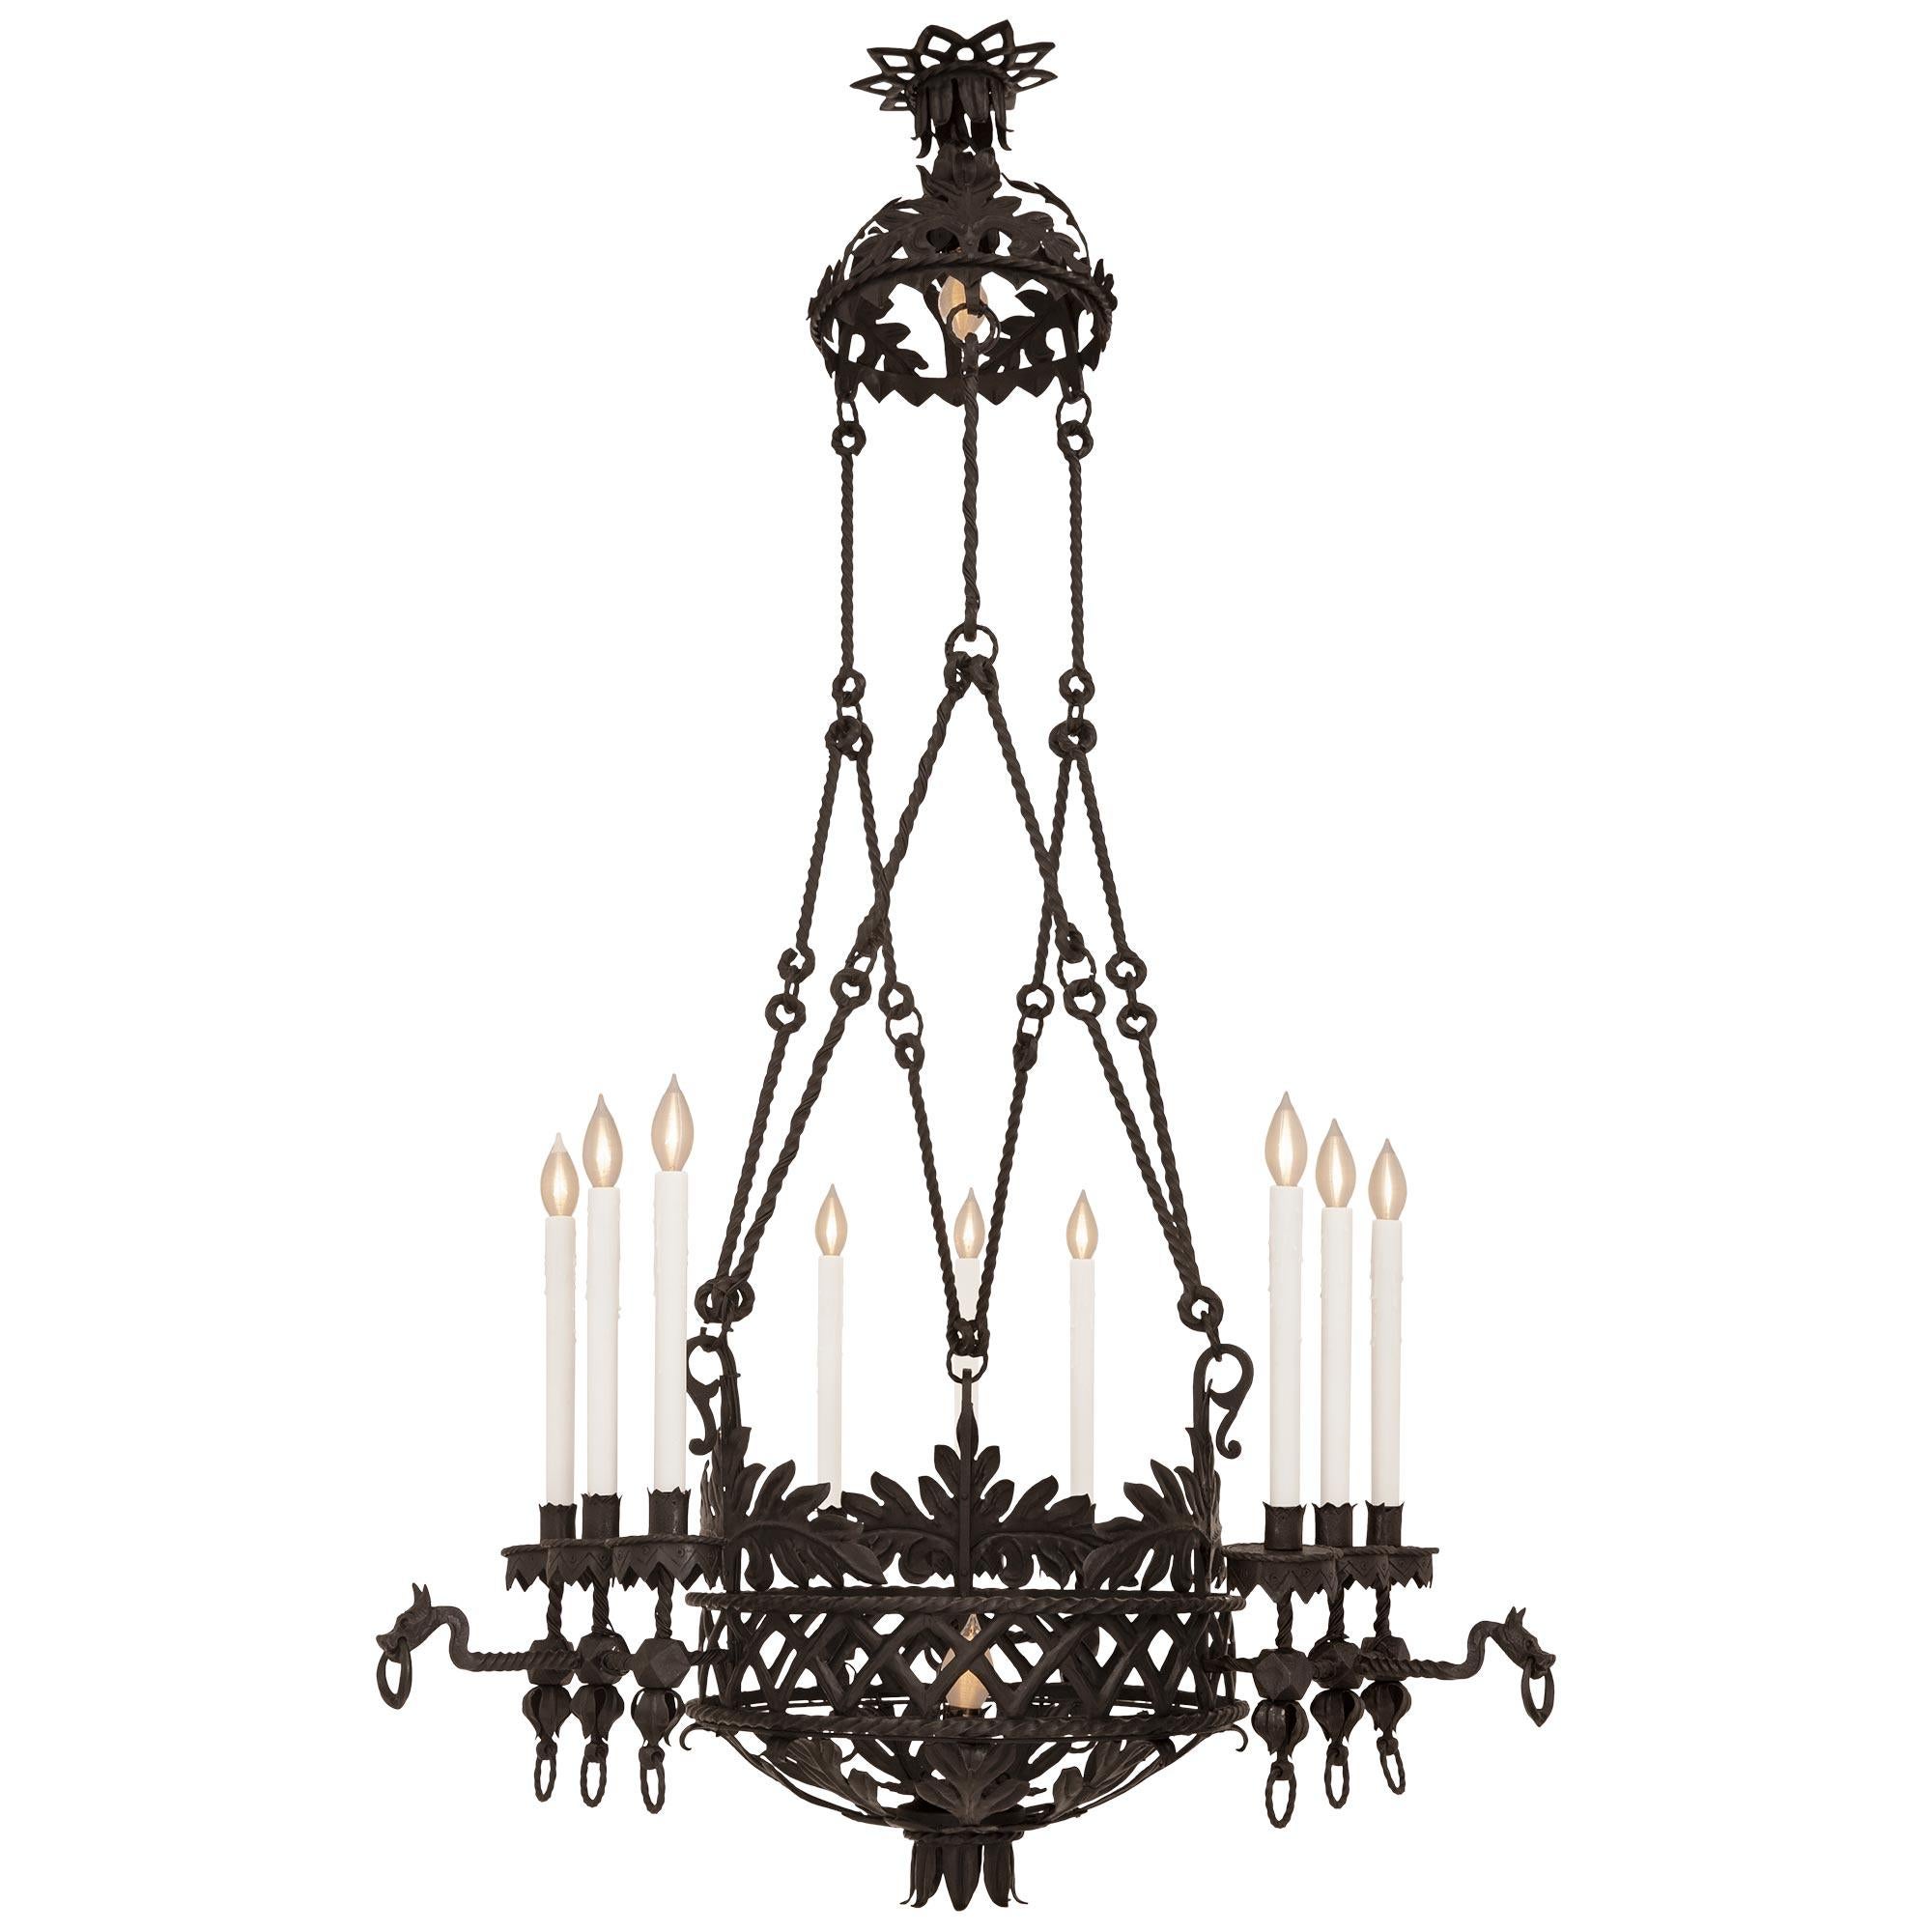 A large scaled French 19th century Renaissance st. Wrought Iron chandelier. The eleven light chandelier has a bottom half round foliate decorated dome with a central bottom finial and a bottom interior light bulb. The dome leads upwards to a lattice